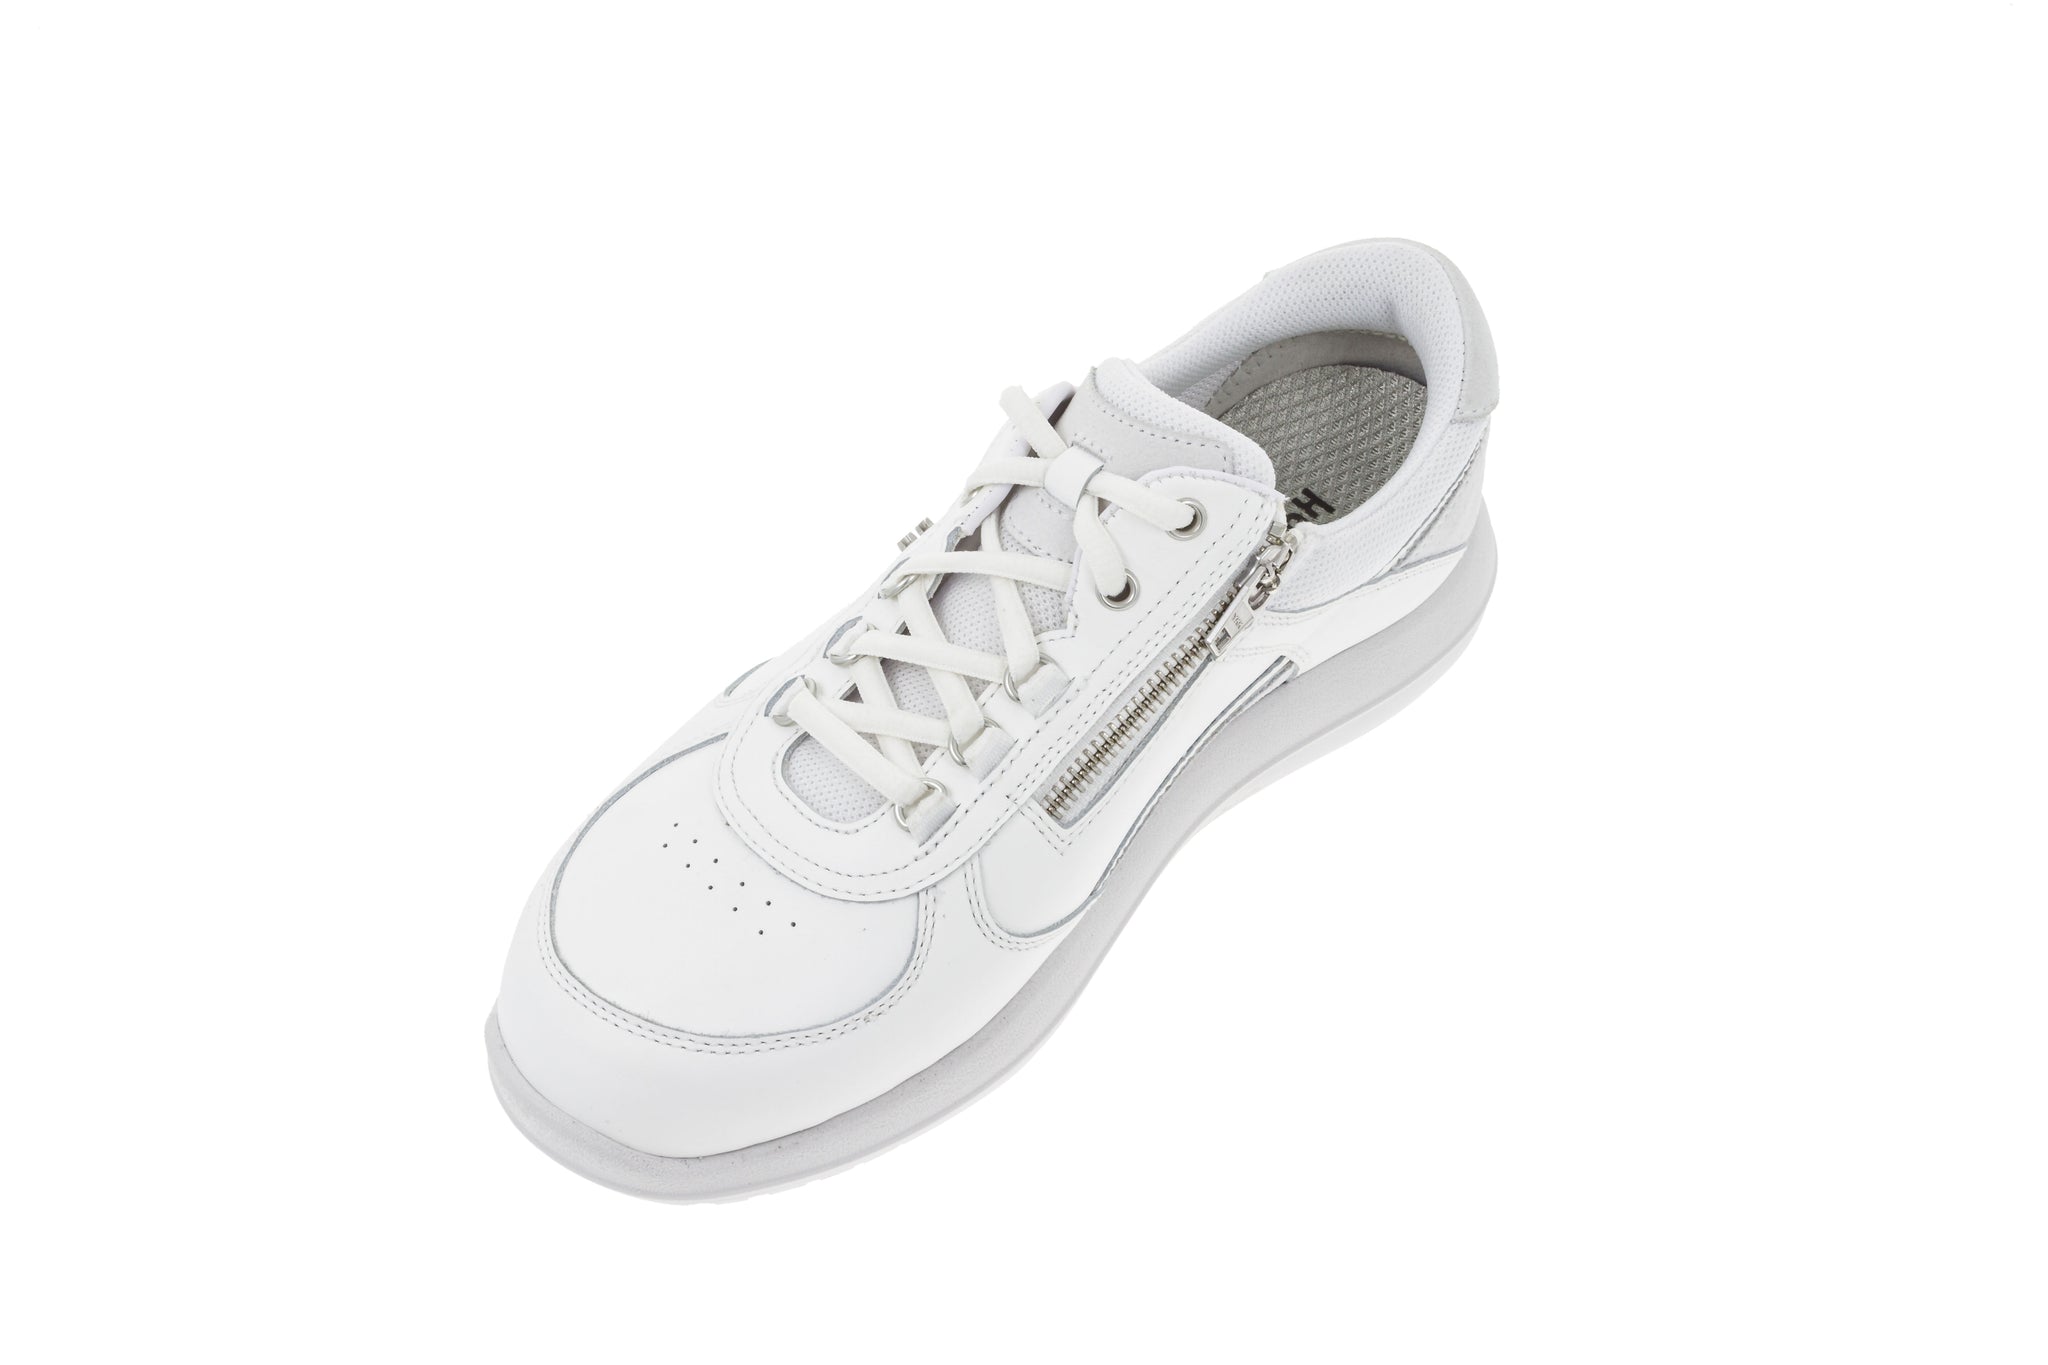 kybun Rolle White: Swiss Air-Cushion Shoe for Pain Relief – kybun online  store USA